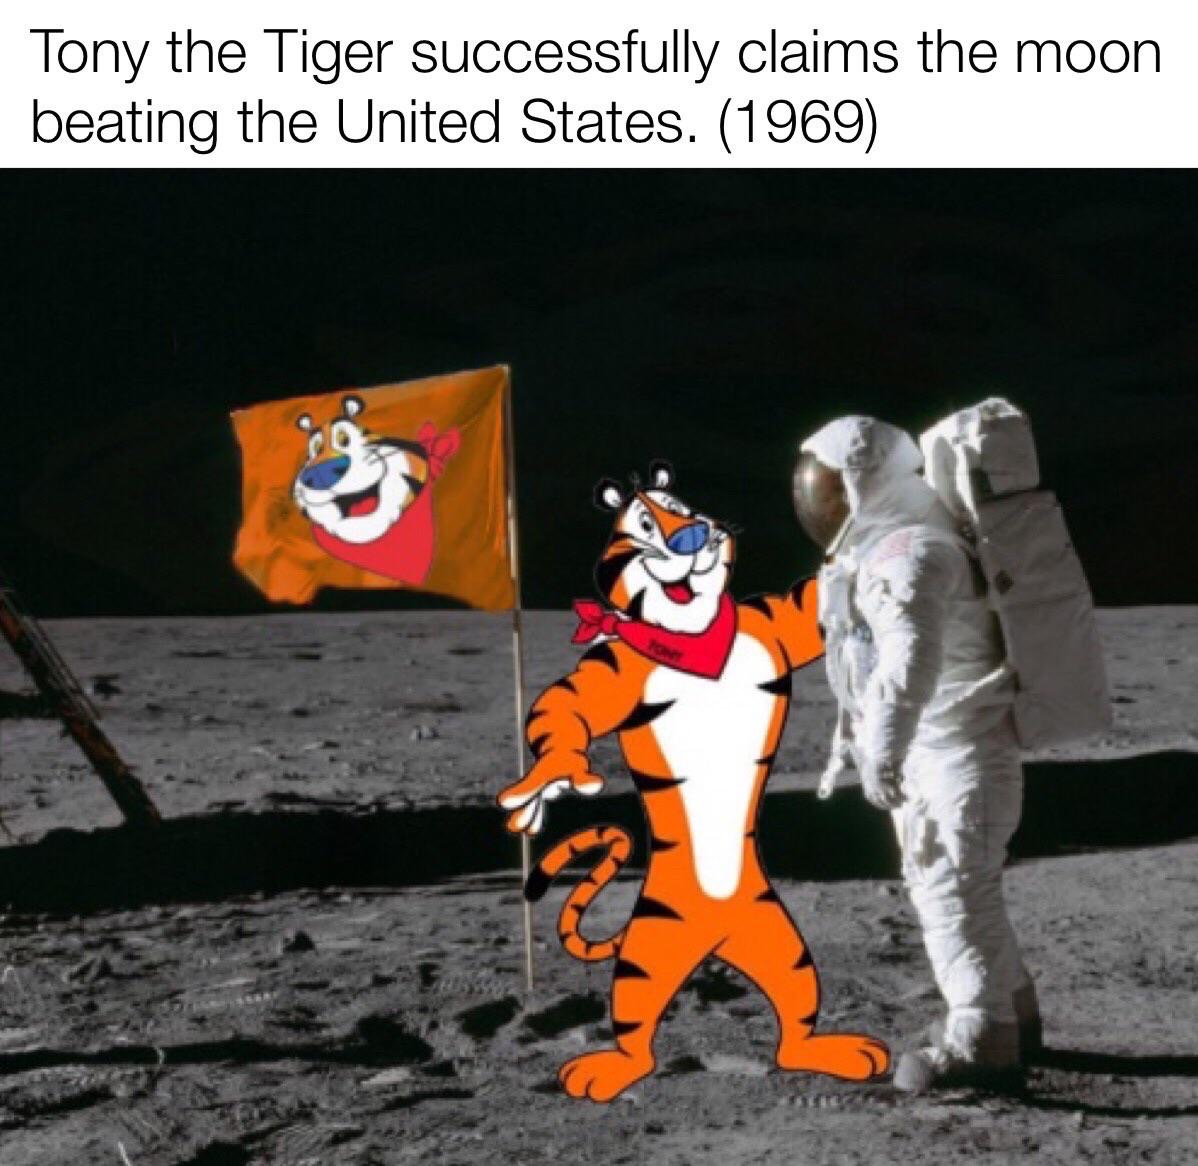 neil armstrong 1969 - Tony the Tiger successfully claims the moon beating the United States. 1969